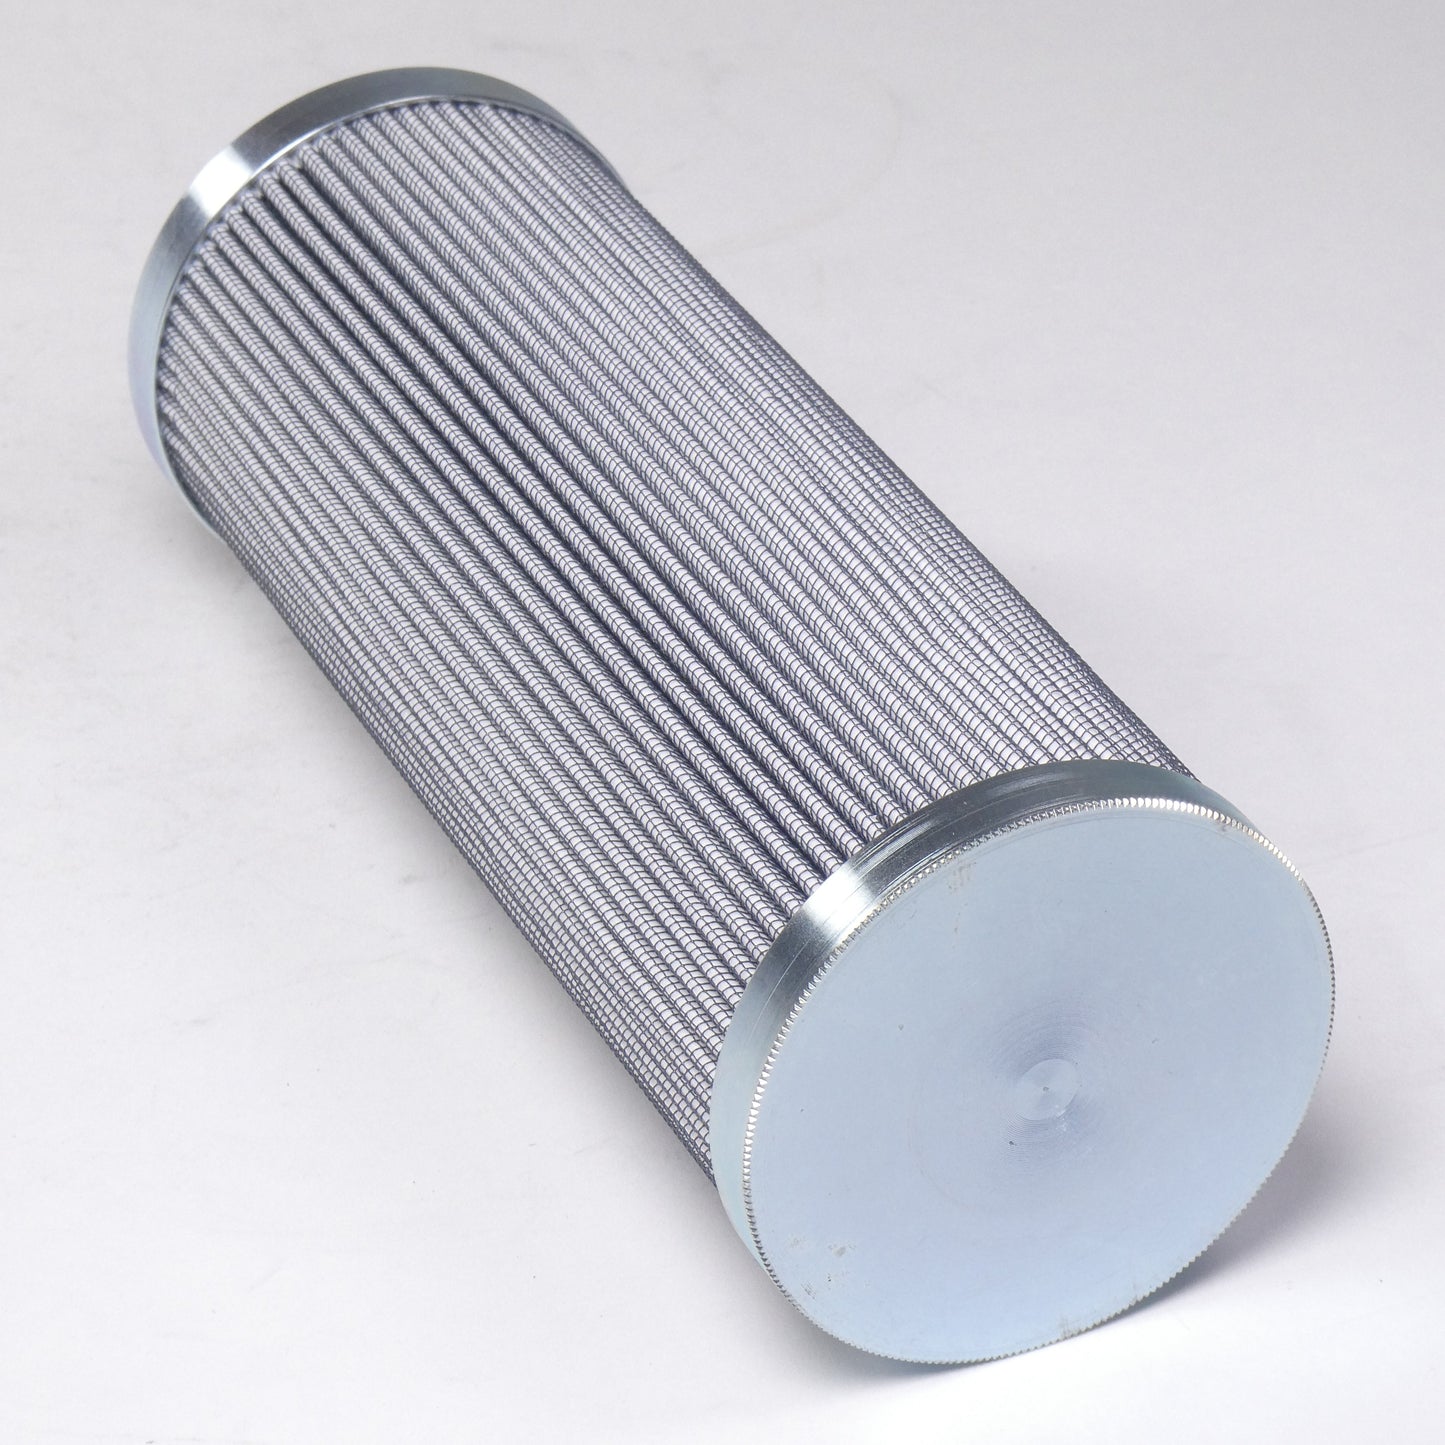 Hydrafil Replacement Filter Element for Pall HC9601ENK4Z